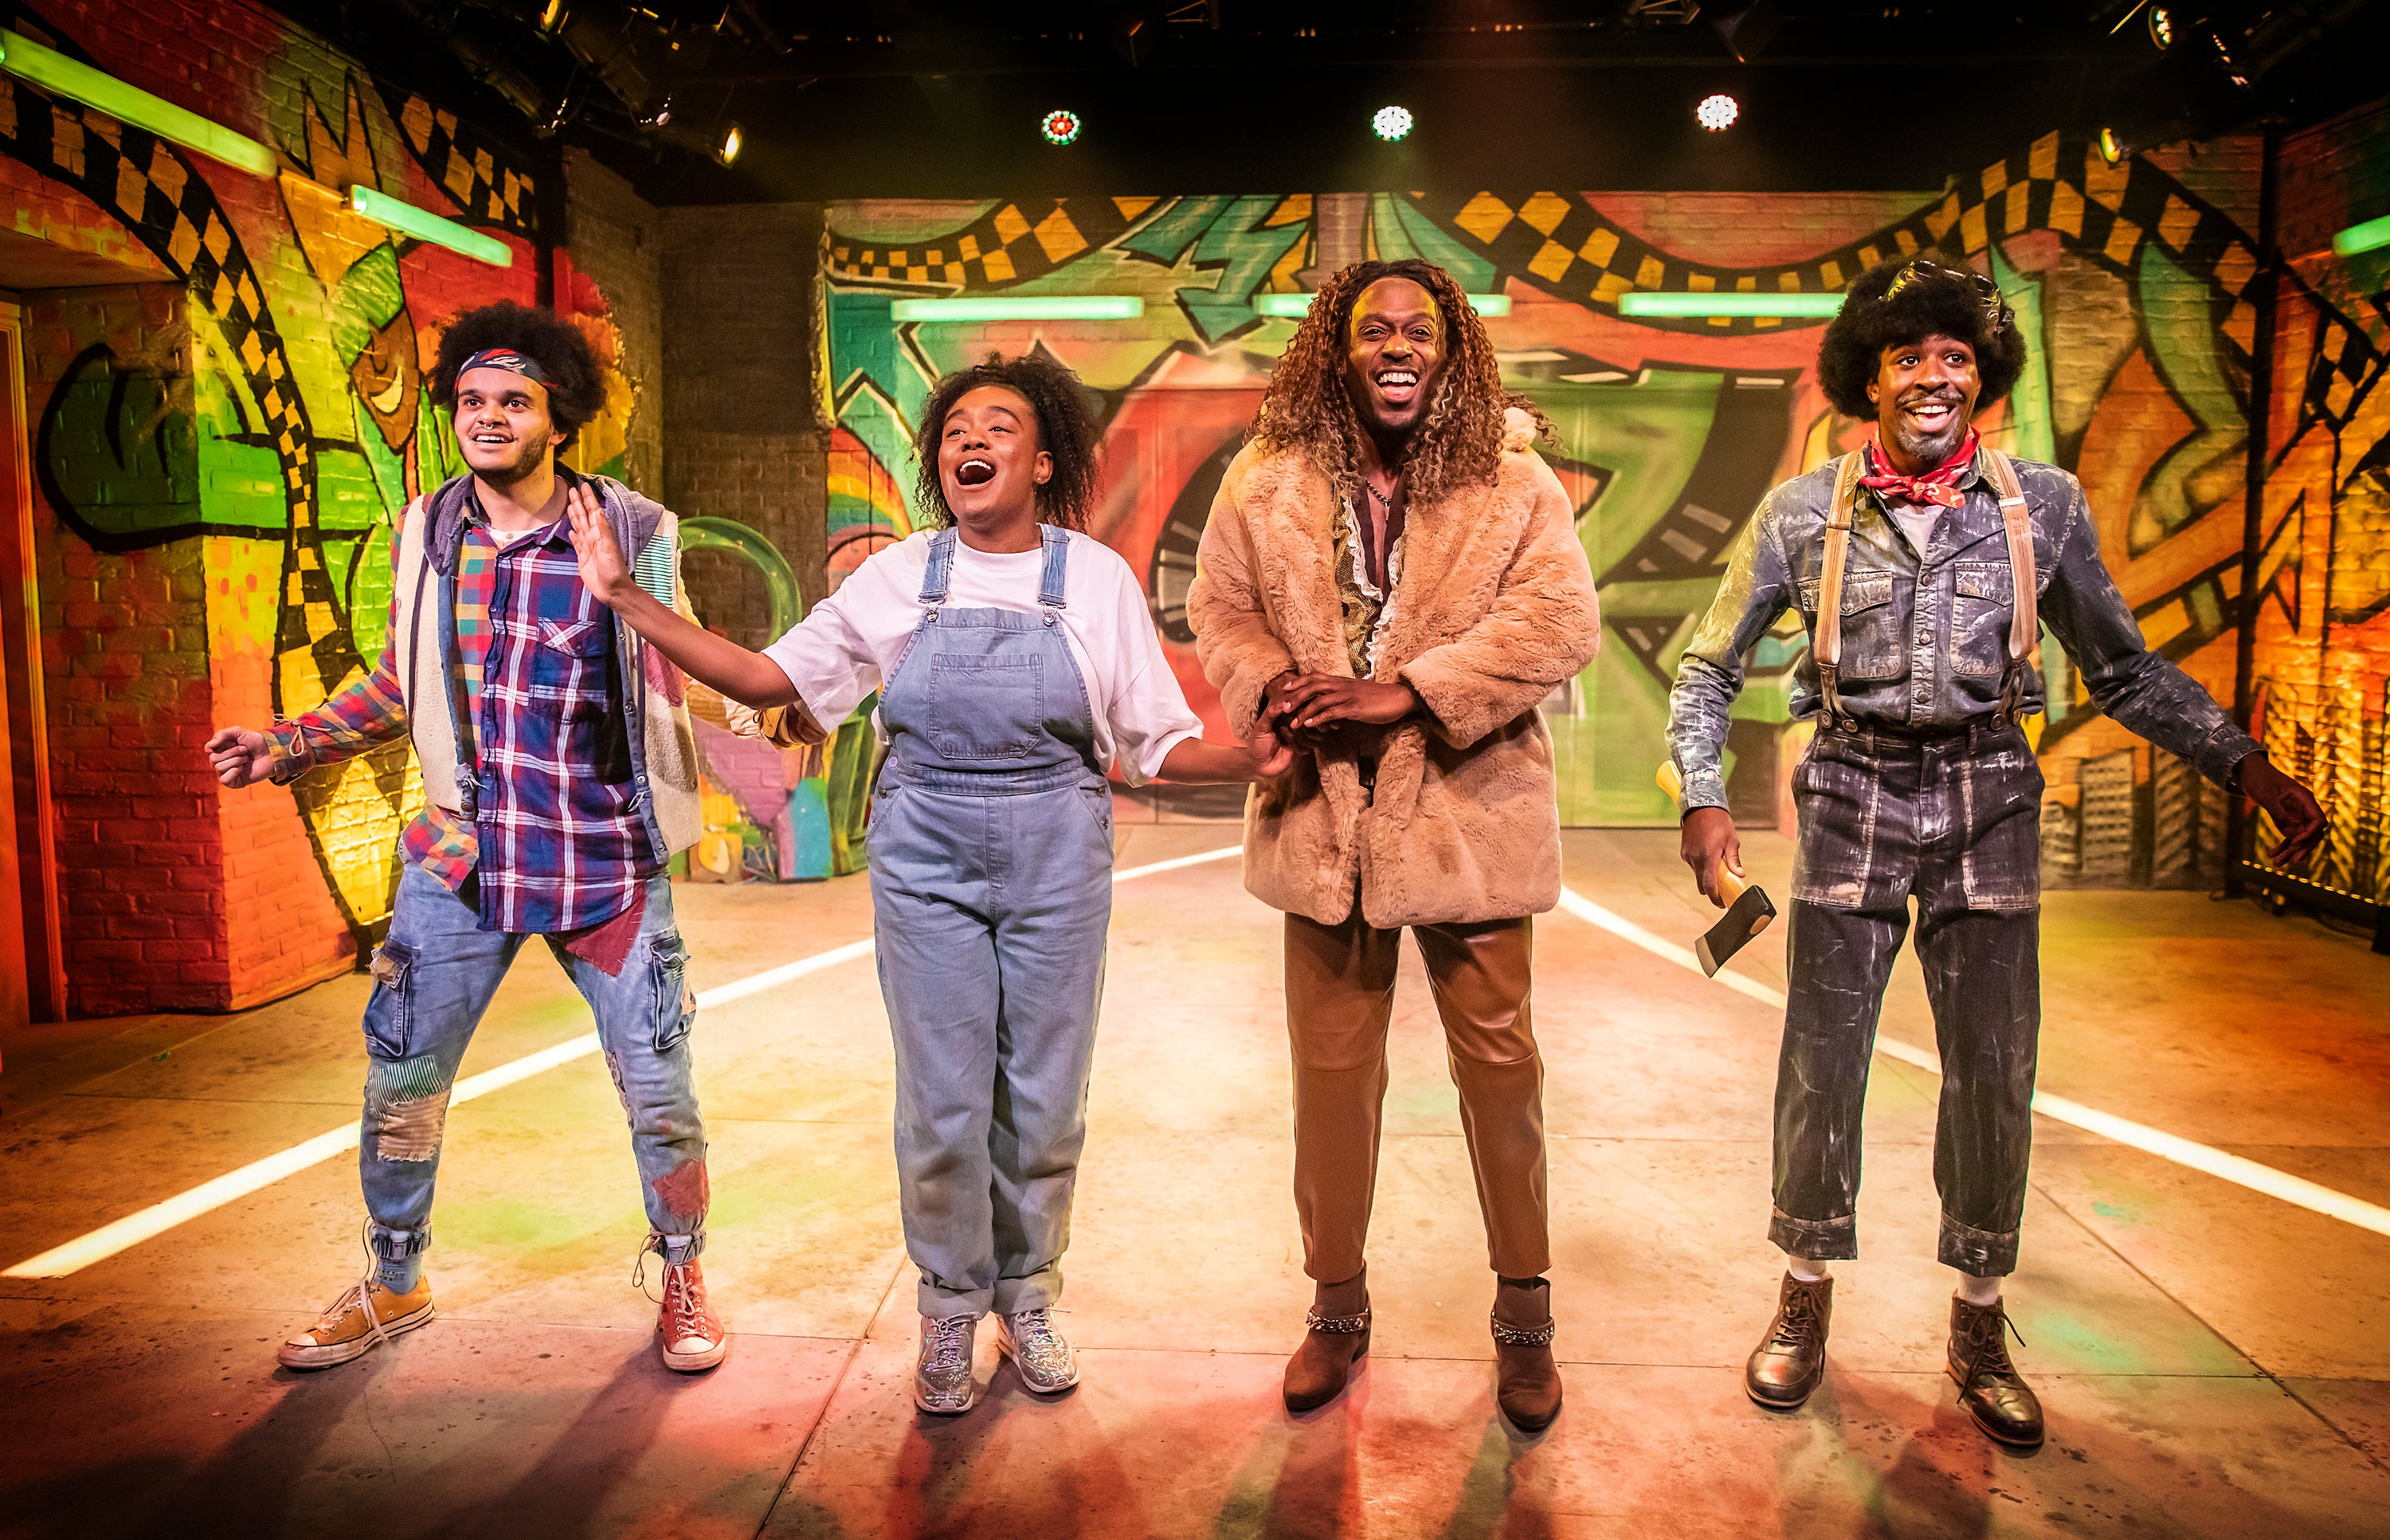 Tarik Fimpong (Scarecrow), Cherelle Williams (Dorothy), Jonathan Andre (Lion), Llewellyn Graham (Tinman) in ‘The Wiz' at Hope Mill Theatre